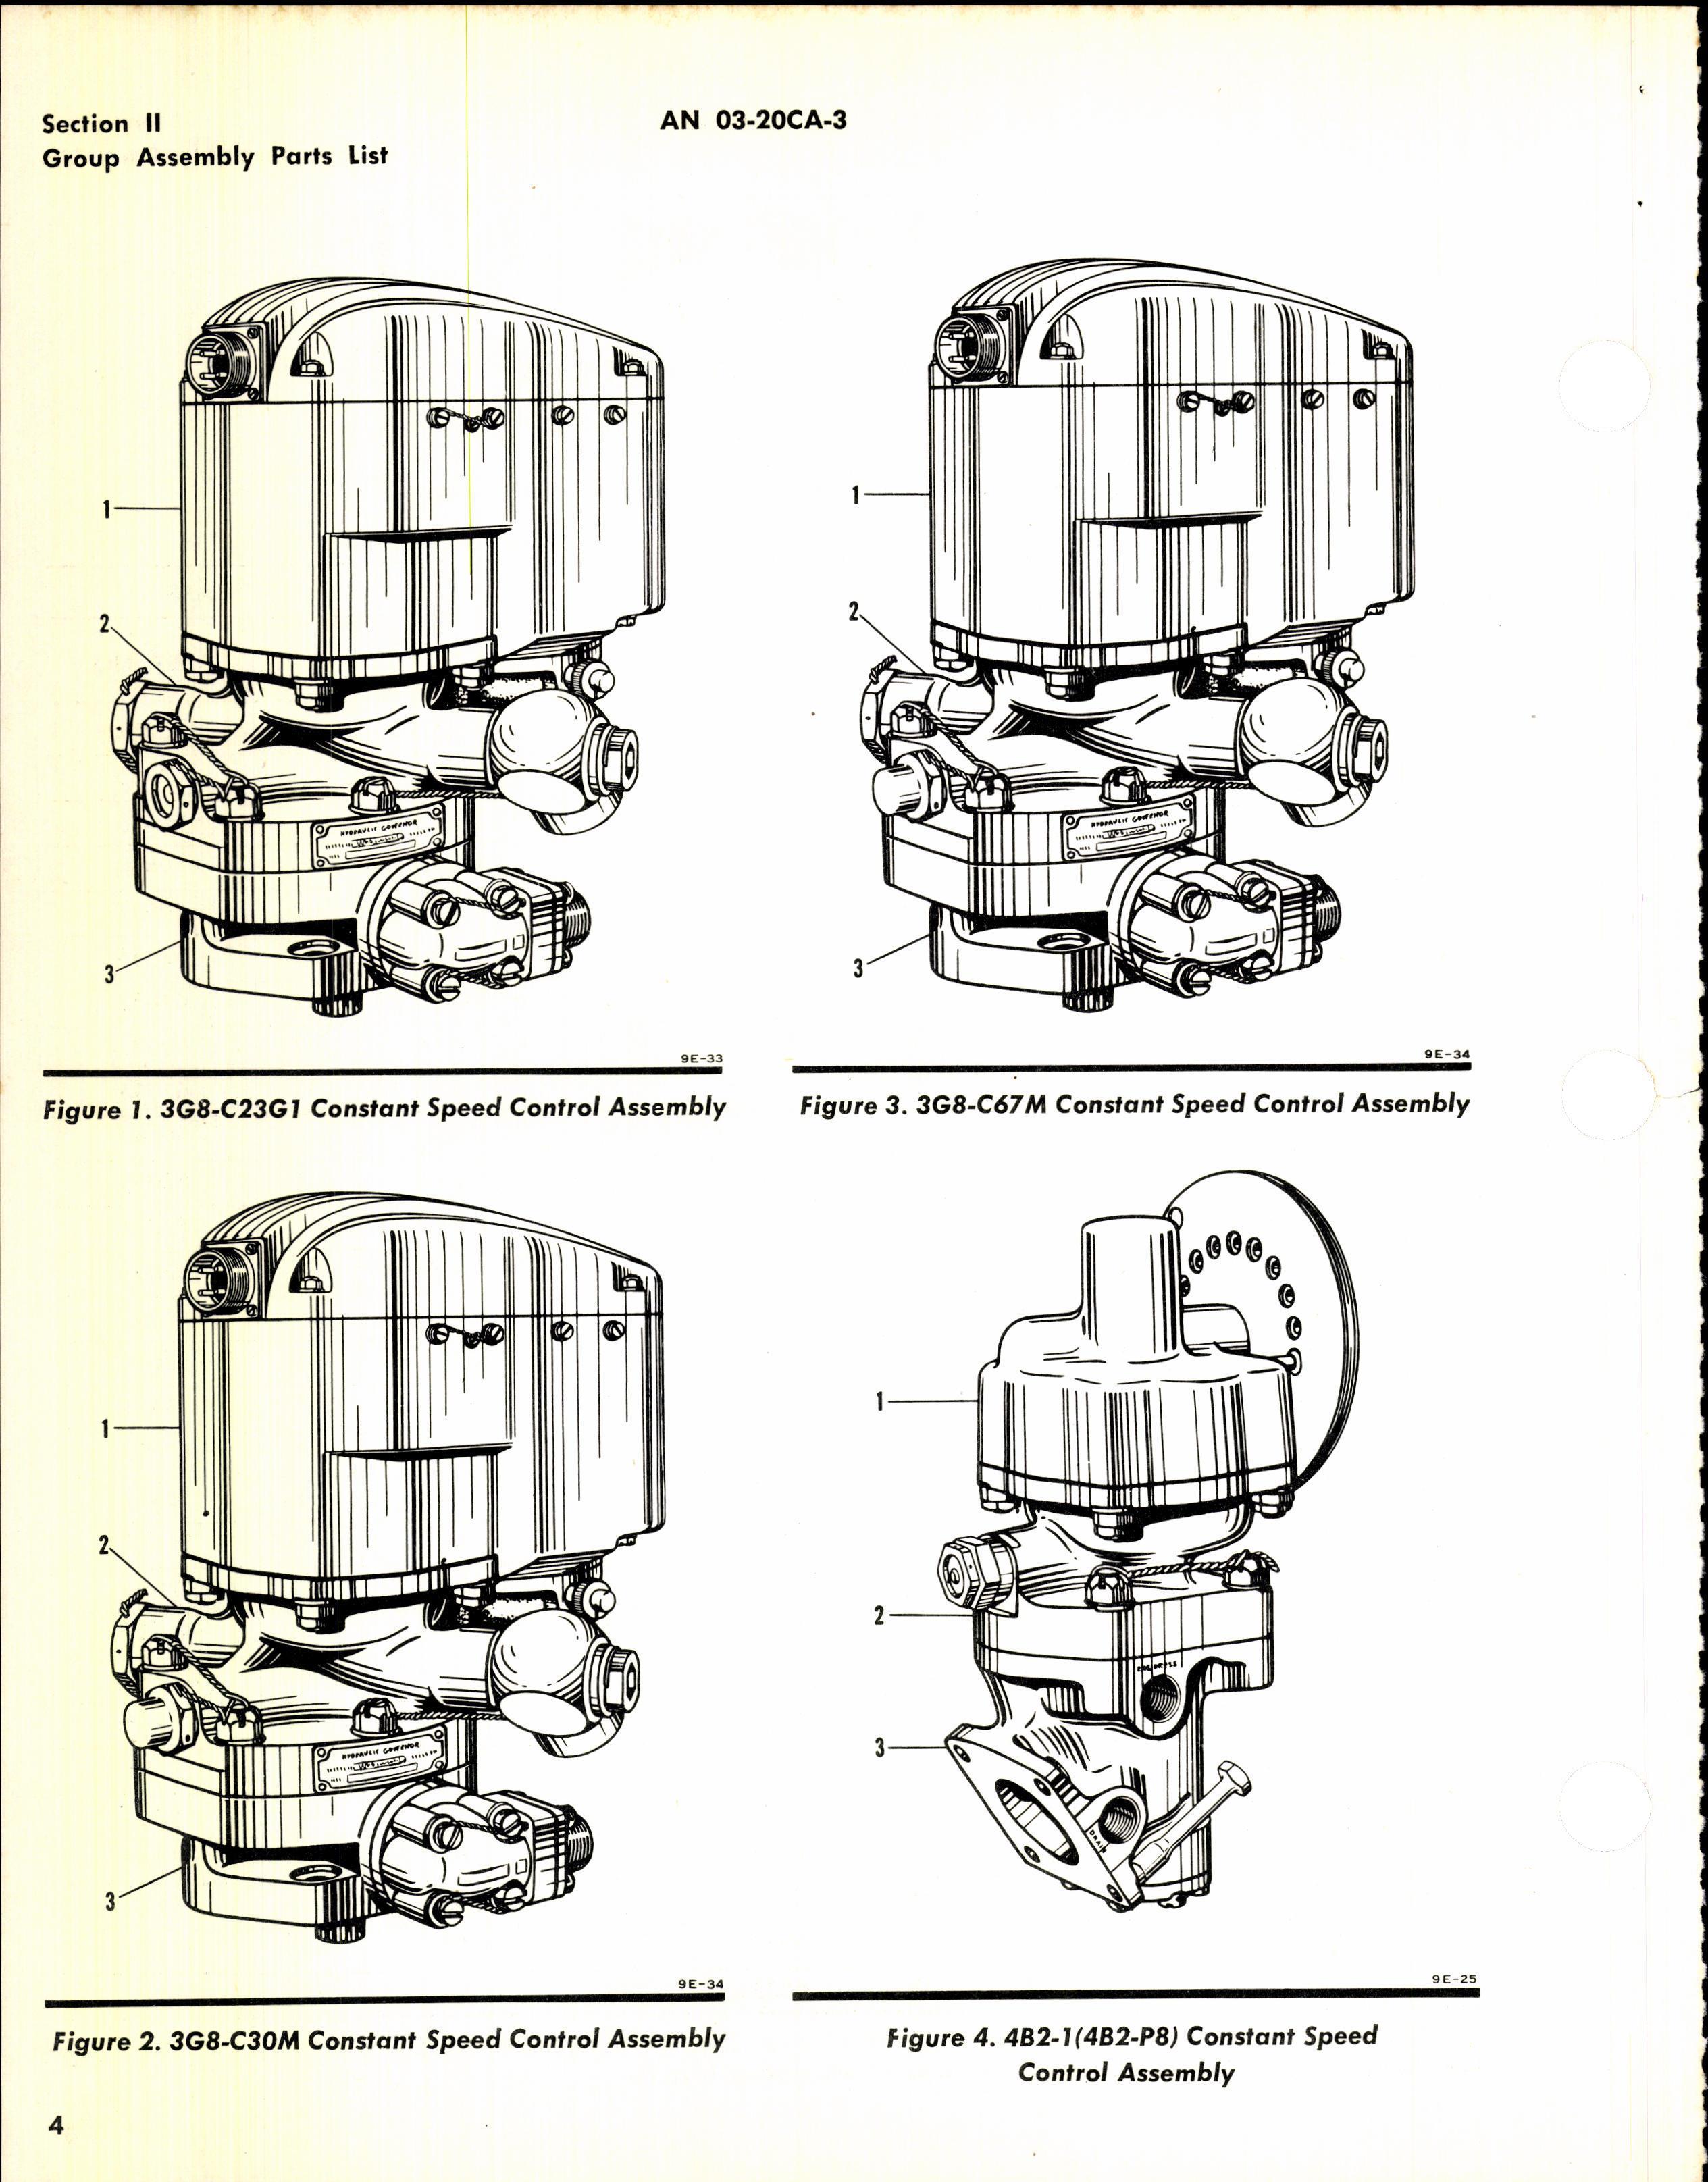 Sample page 8 from AirCorps Library document: Illustrated Parts Breakdown for Single-Acting Constant Speed Control Assemblies for Hydromatic Propellers